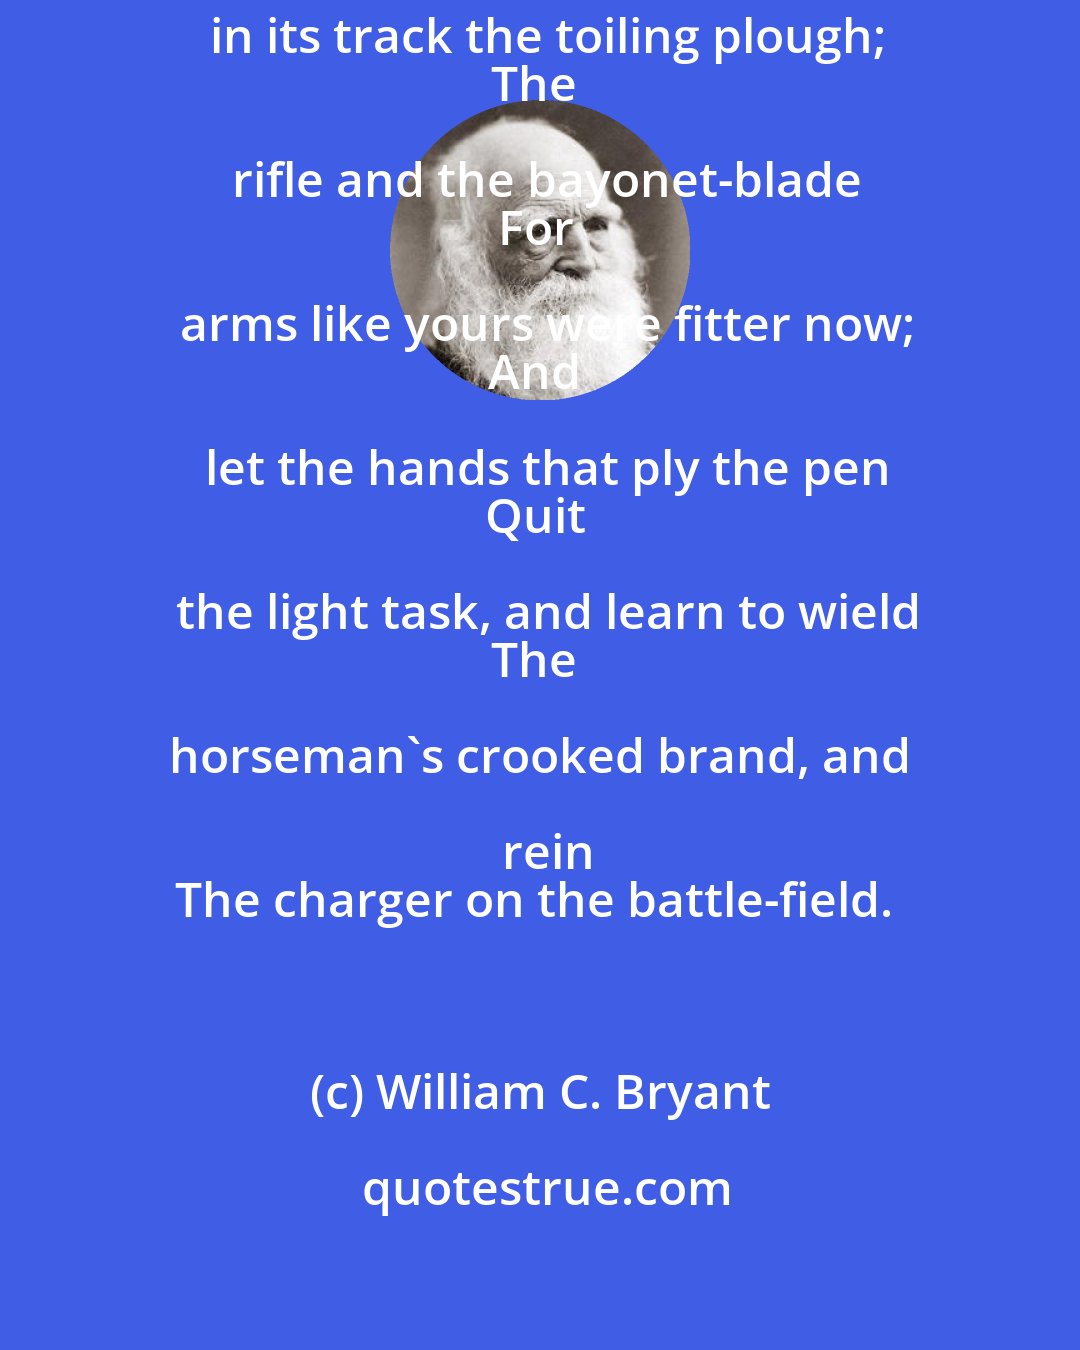 William C. Bryant: Lay down the axe; fling by the spade;
Leave in its track the toiling plough;
The rifle and the bayonet-blade
For arms like yours were fitter now;
And let the hands that ply the pen
Quit the light task, and learn to wield
The horseman's crooked brand, and rein
The charger on the battle-field.